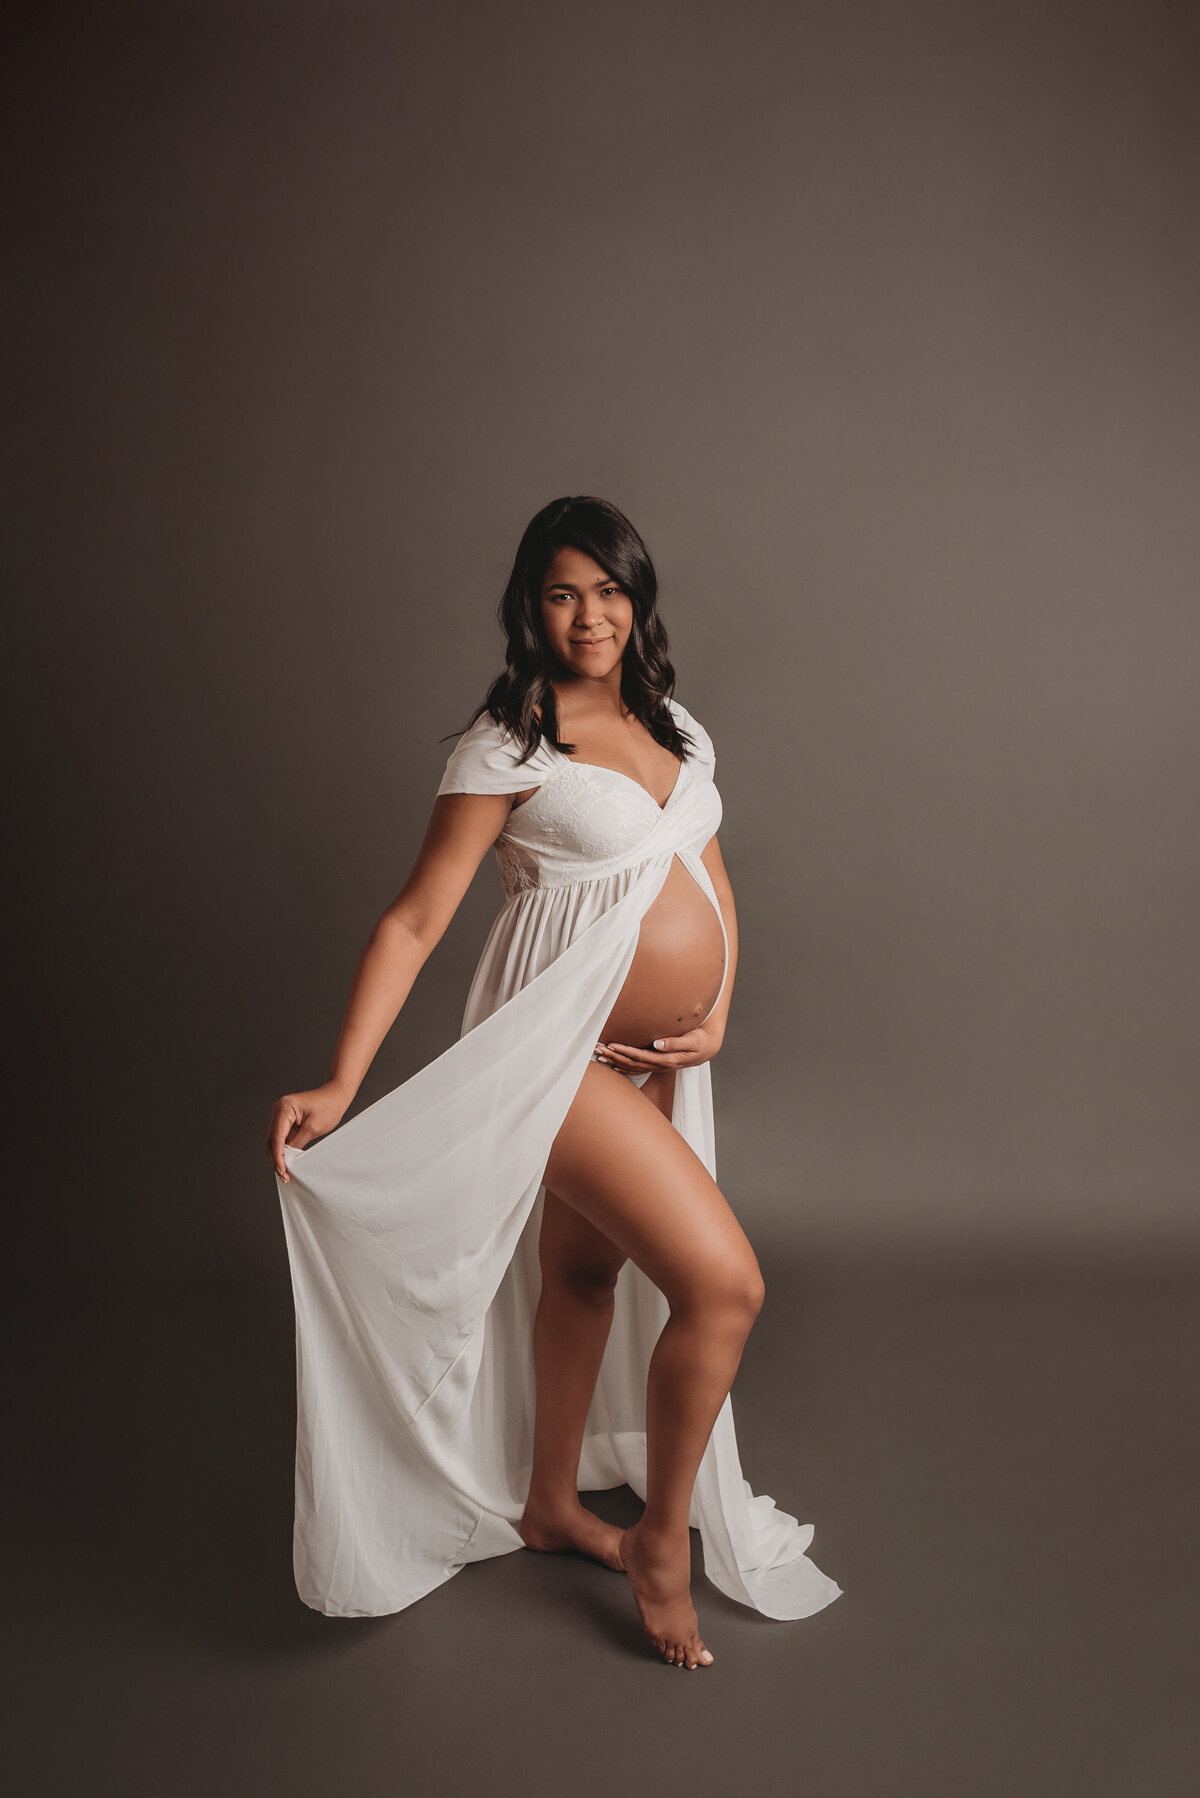 Pregnant woman posing for maternity pictures in a white sheer dress and grey backdrop.